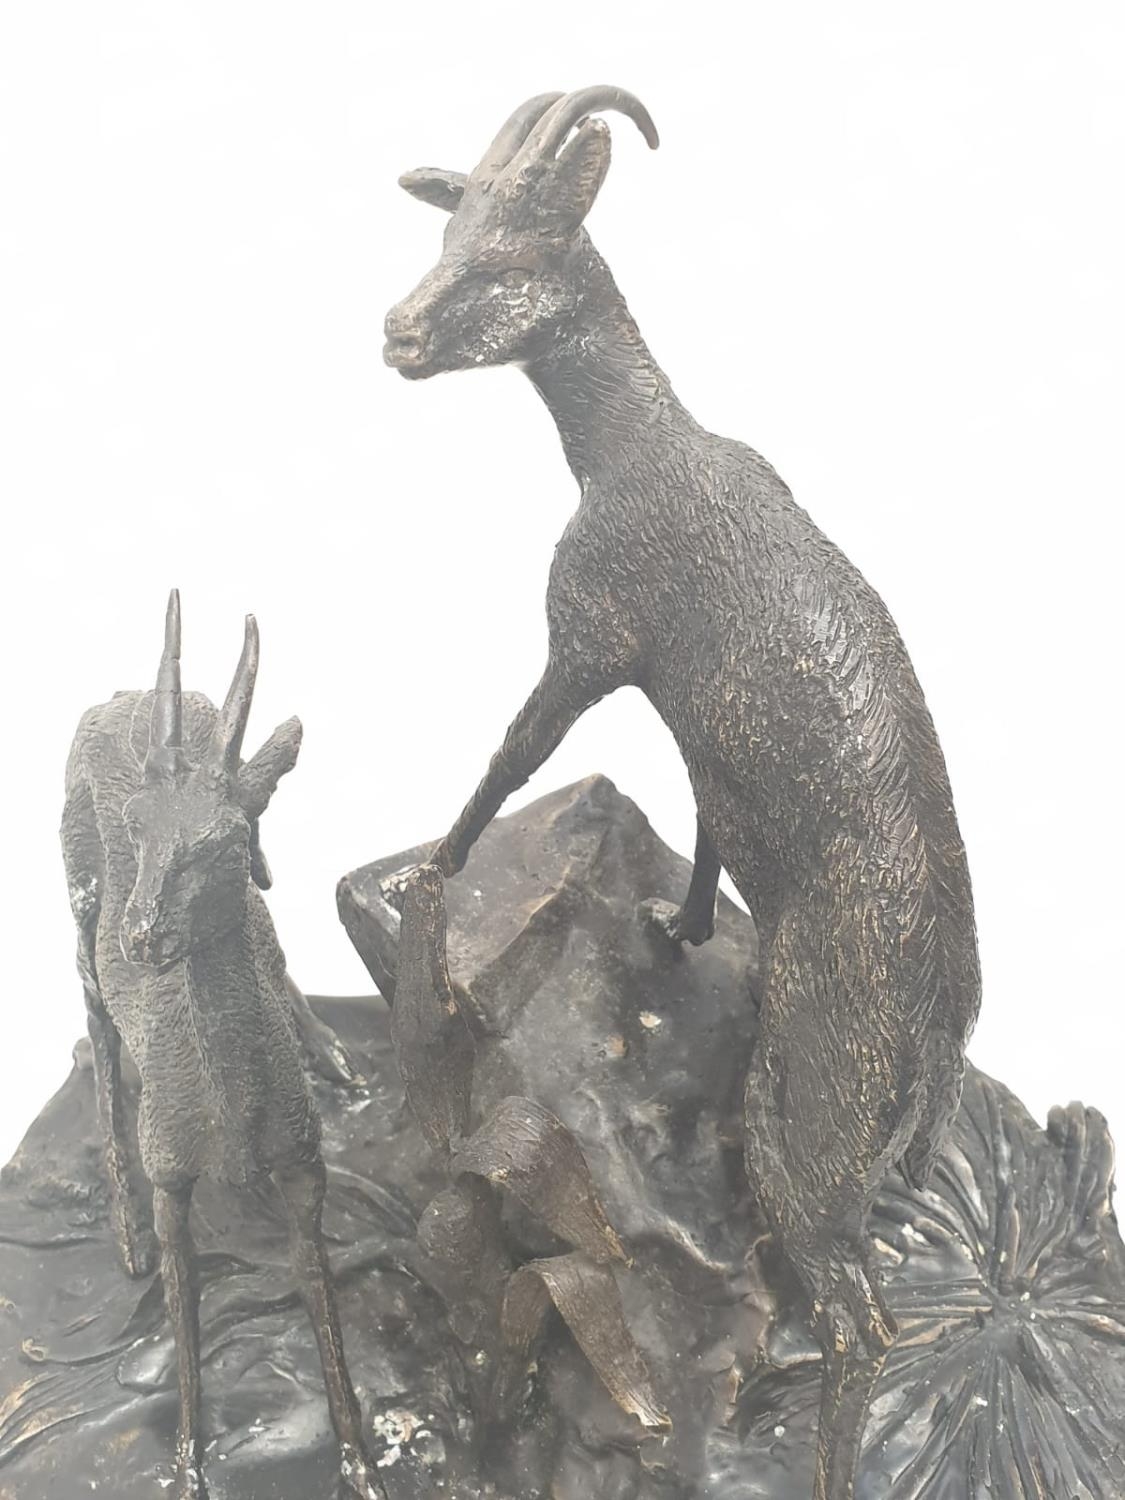 A vintage bronze sculpture of two deer, alert to the danger around them. 25 x 30 cm. - Image 3 of 7